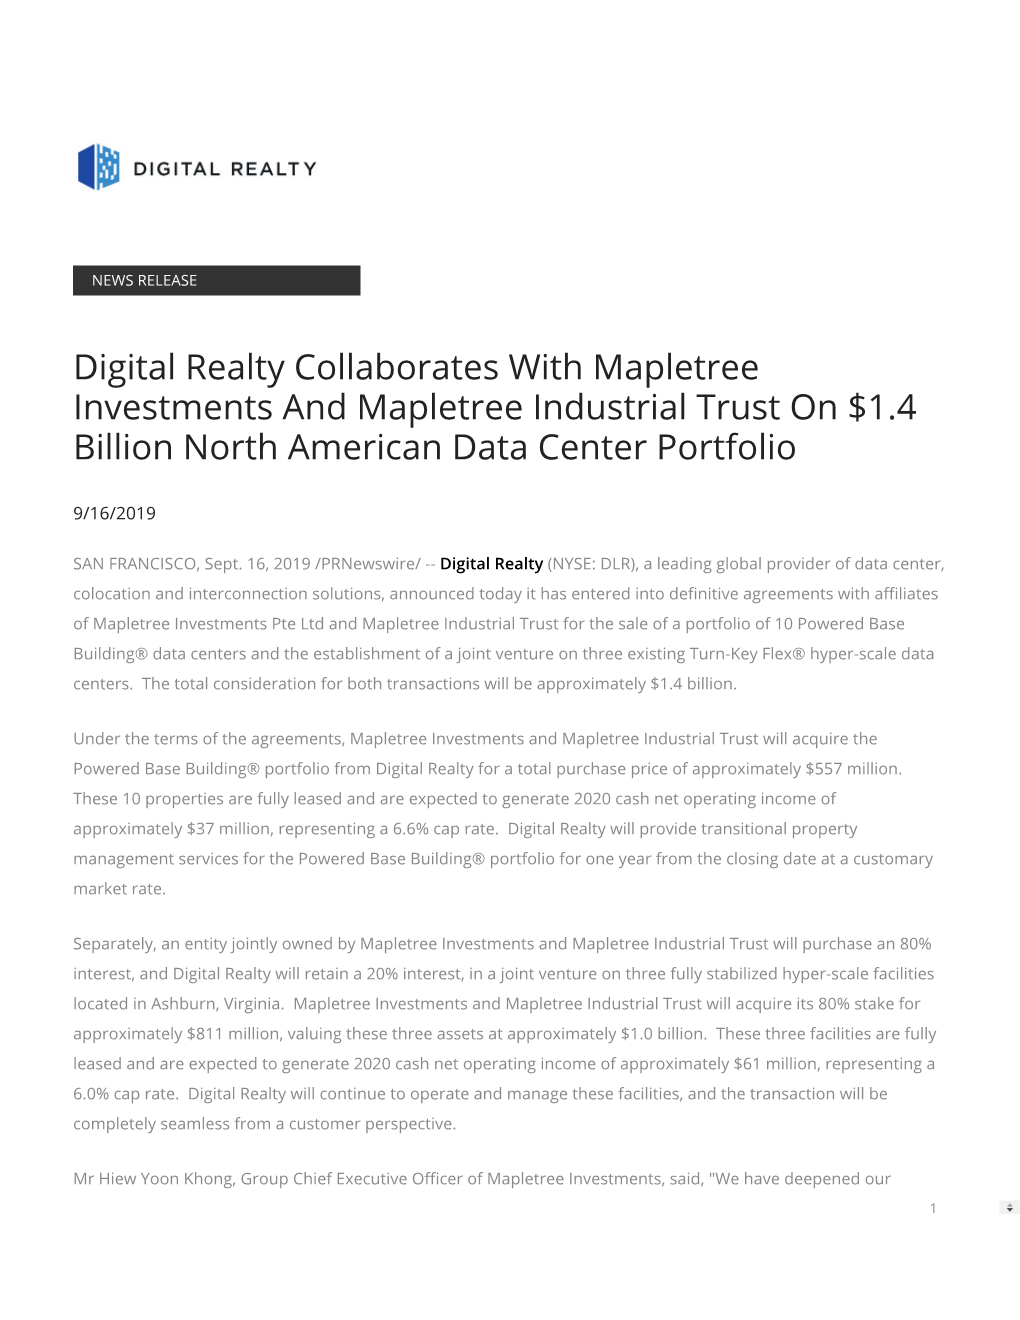 Digital Realty Collaborates with Mapletree Investments and Mapletree Industrial Trust on $1.4 Billion North American Data Center Portfolio